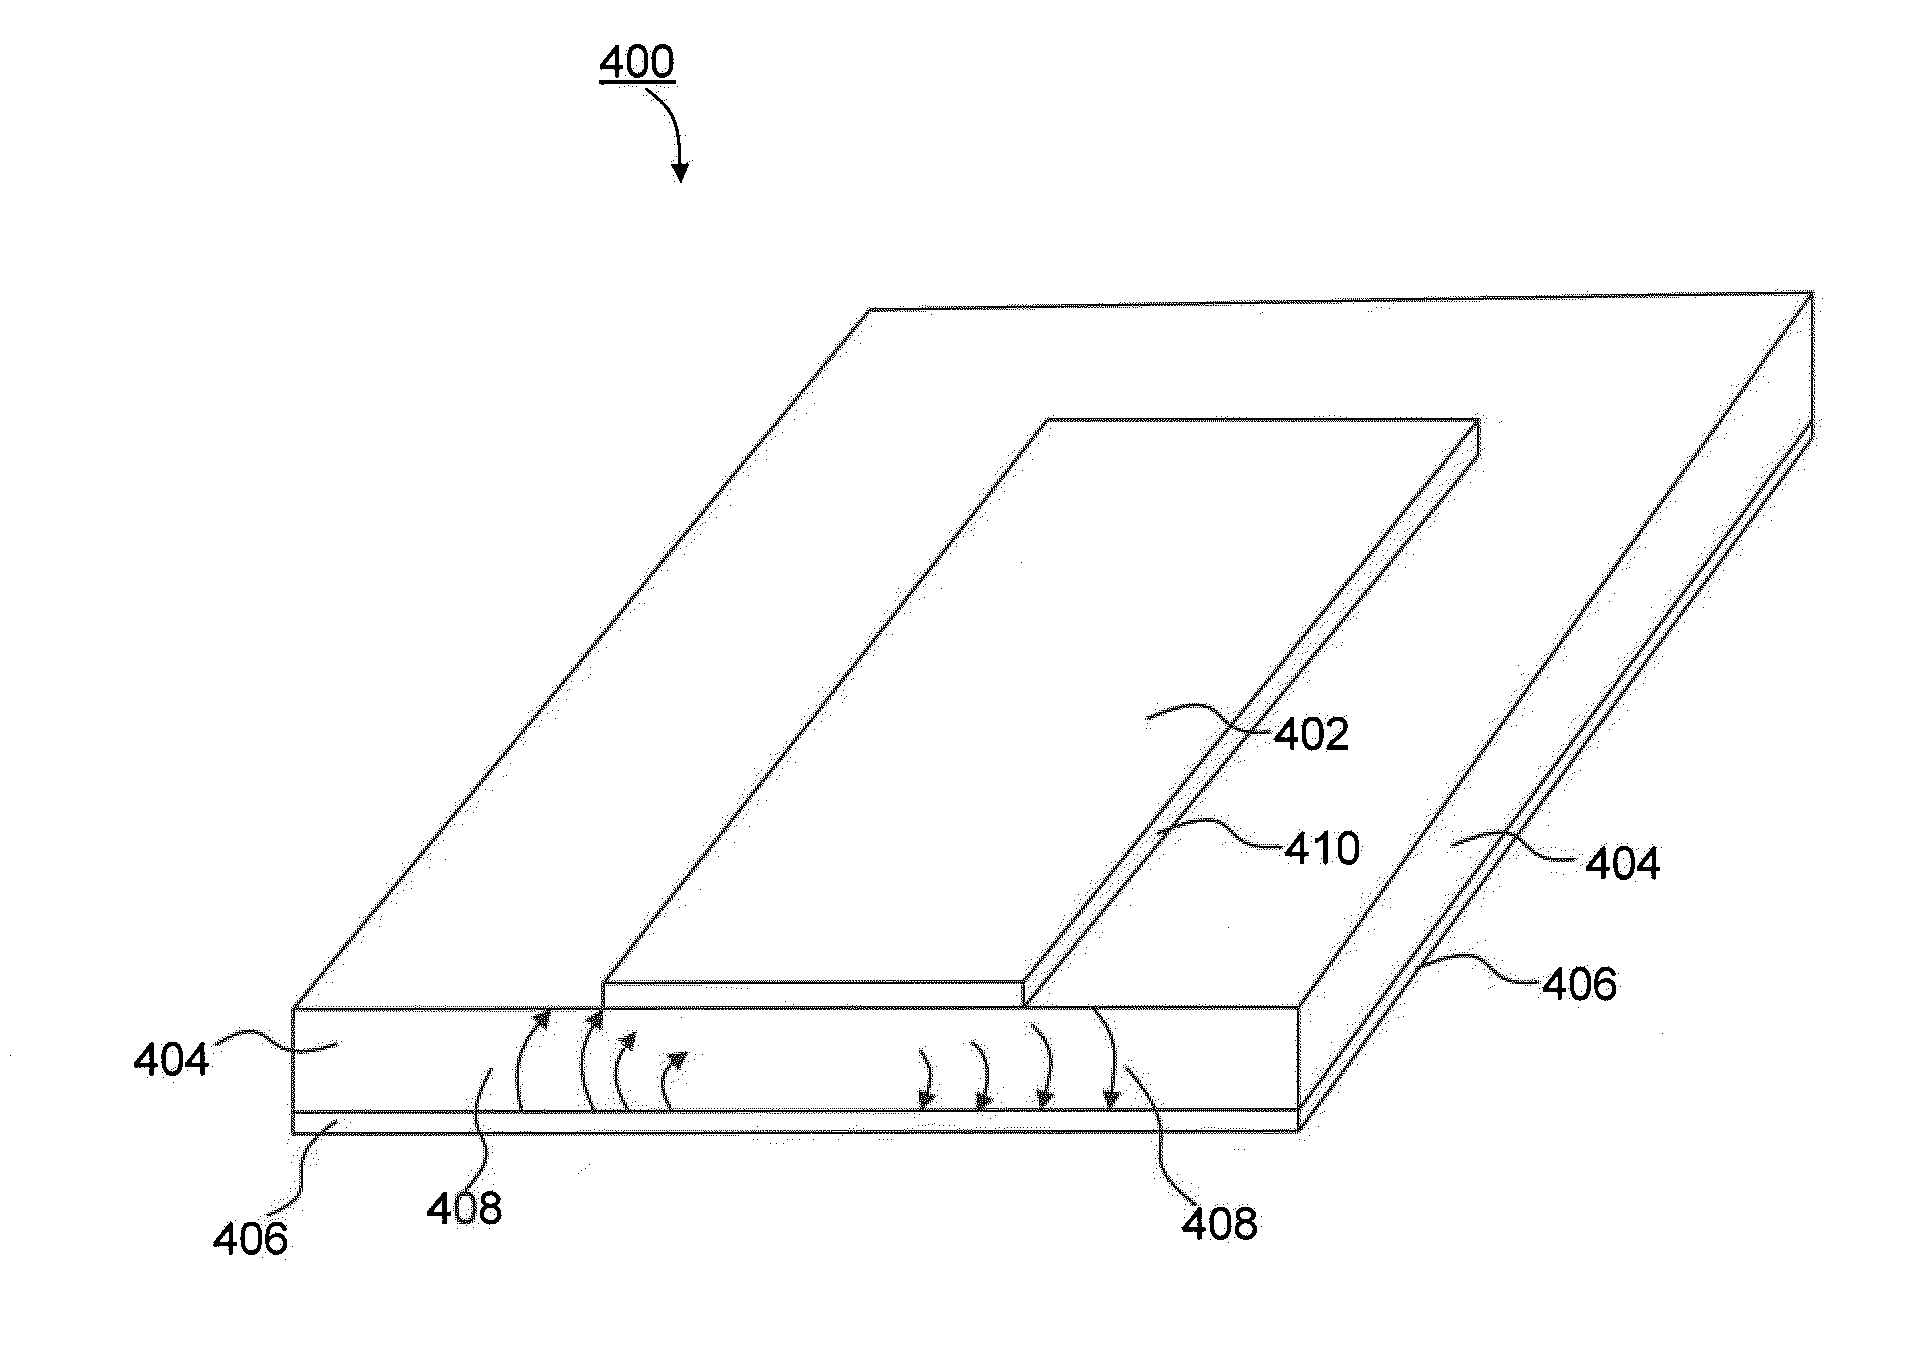 Conformal Electro-Textile Antenna and Electronic Band Gap Ground Plane for Suppression of Back Radiation From GPS Antennas Mounted on Aircraft